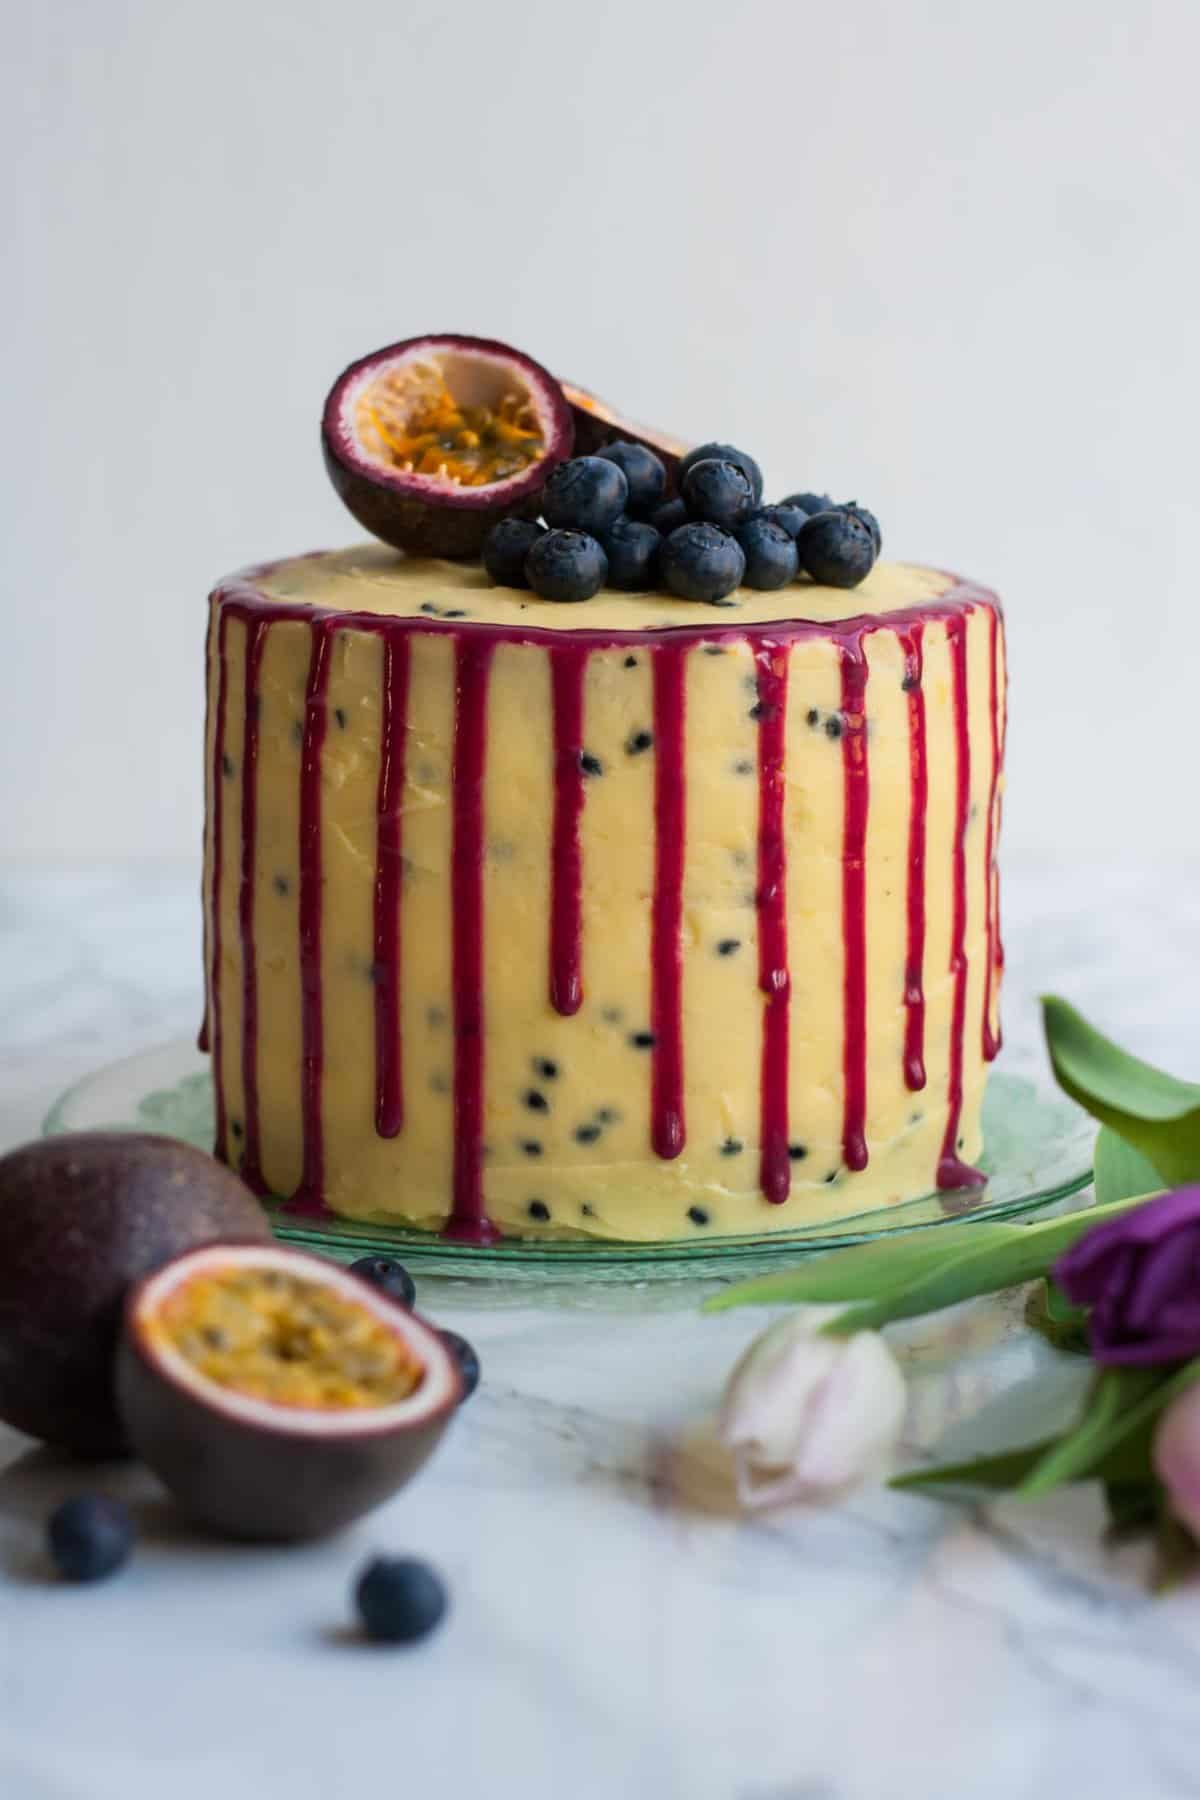 Blueberry Passionfruit Layer Cake - a bright and zingy tropical cake, perfect for a celebration! | eatloveeats.com